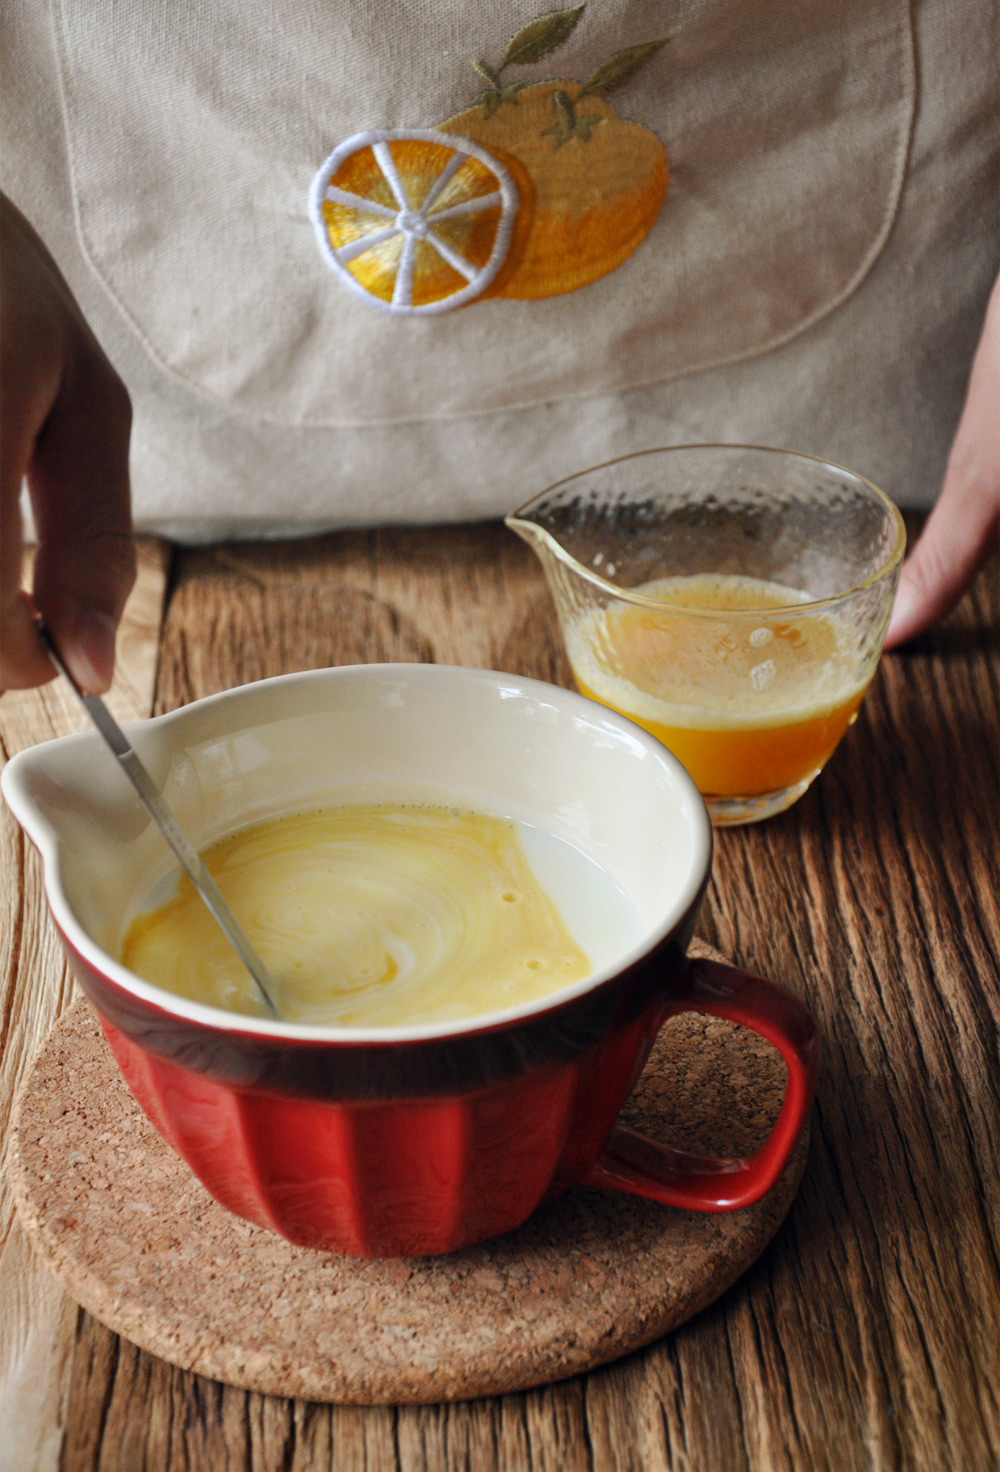 A Day Recipes: Coconut Yoghurt Panna Cotta with Passion Fruit 2